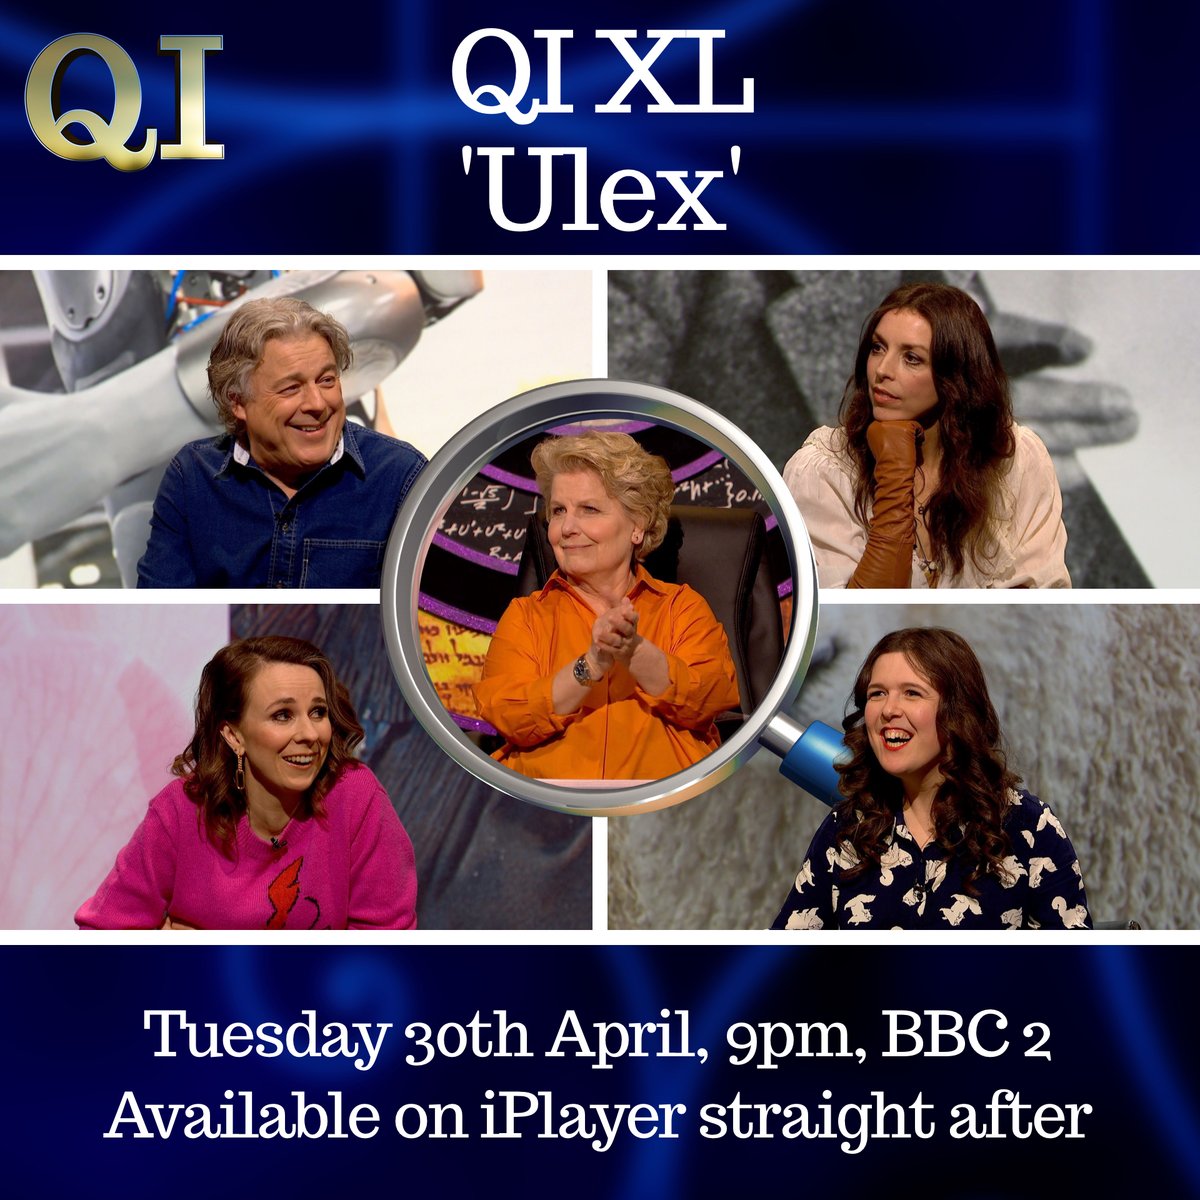 Tonight at 9pm on BBC Two we'll be looking at some unusual U words in our 'Ulex' episode with Sandi, Alan, @BridgetChristie, @ladycariad and @josierones! Available on iPlayer straight after.